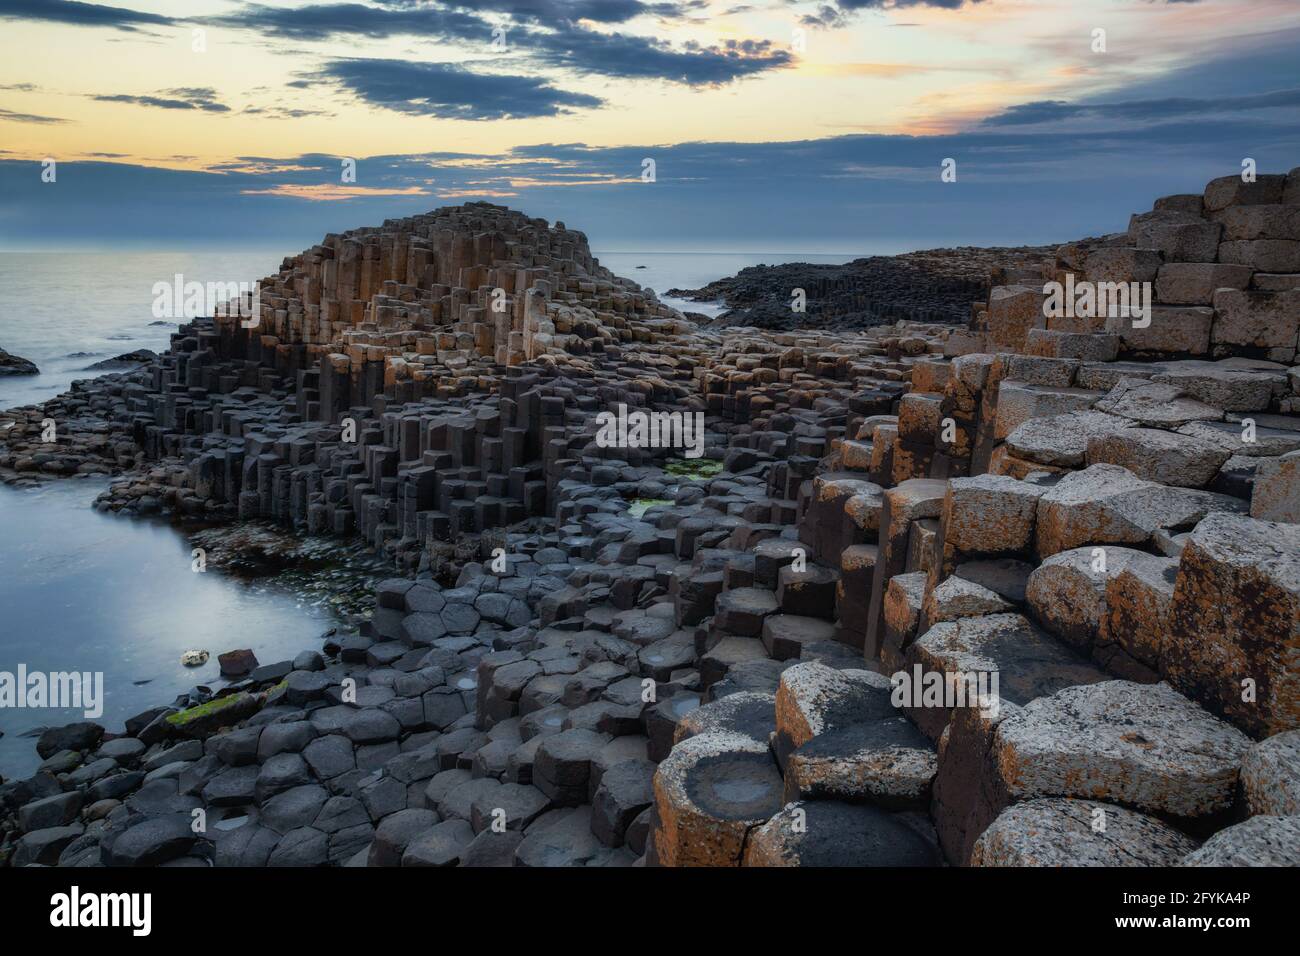 Sunset at the Giant's causeway in County Antrim on the northeast coast of Northern Ireland. Stock Photo